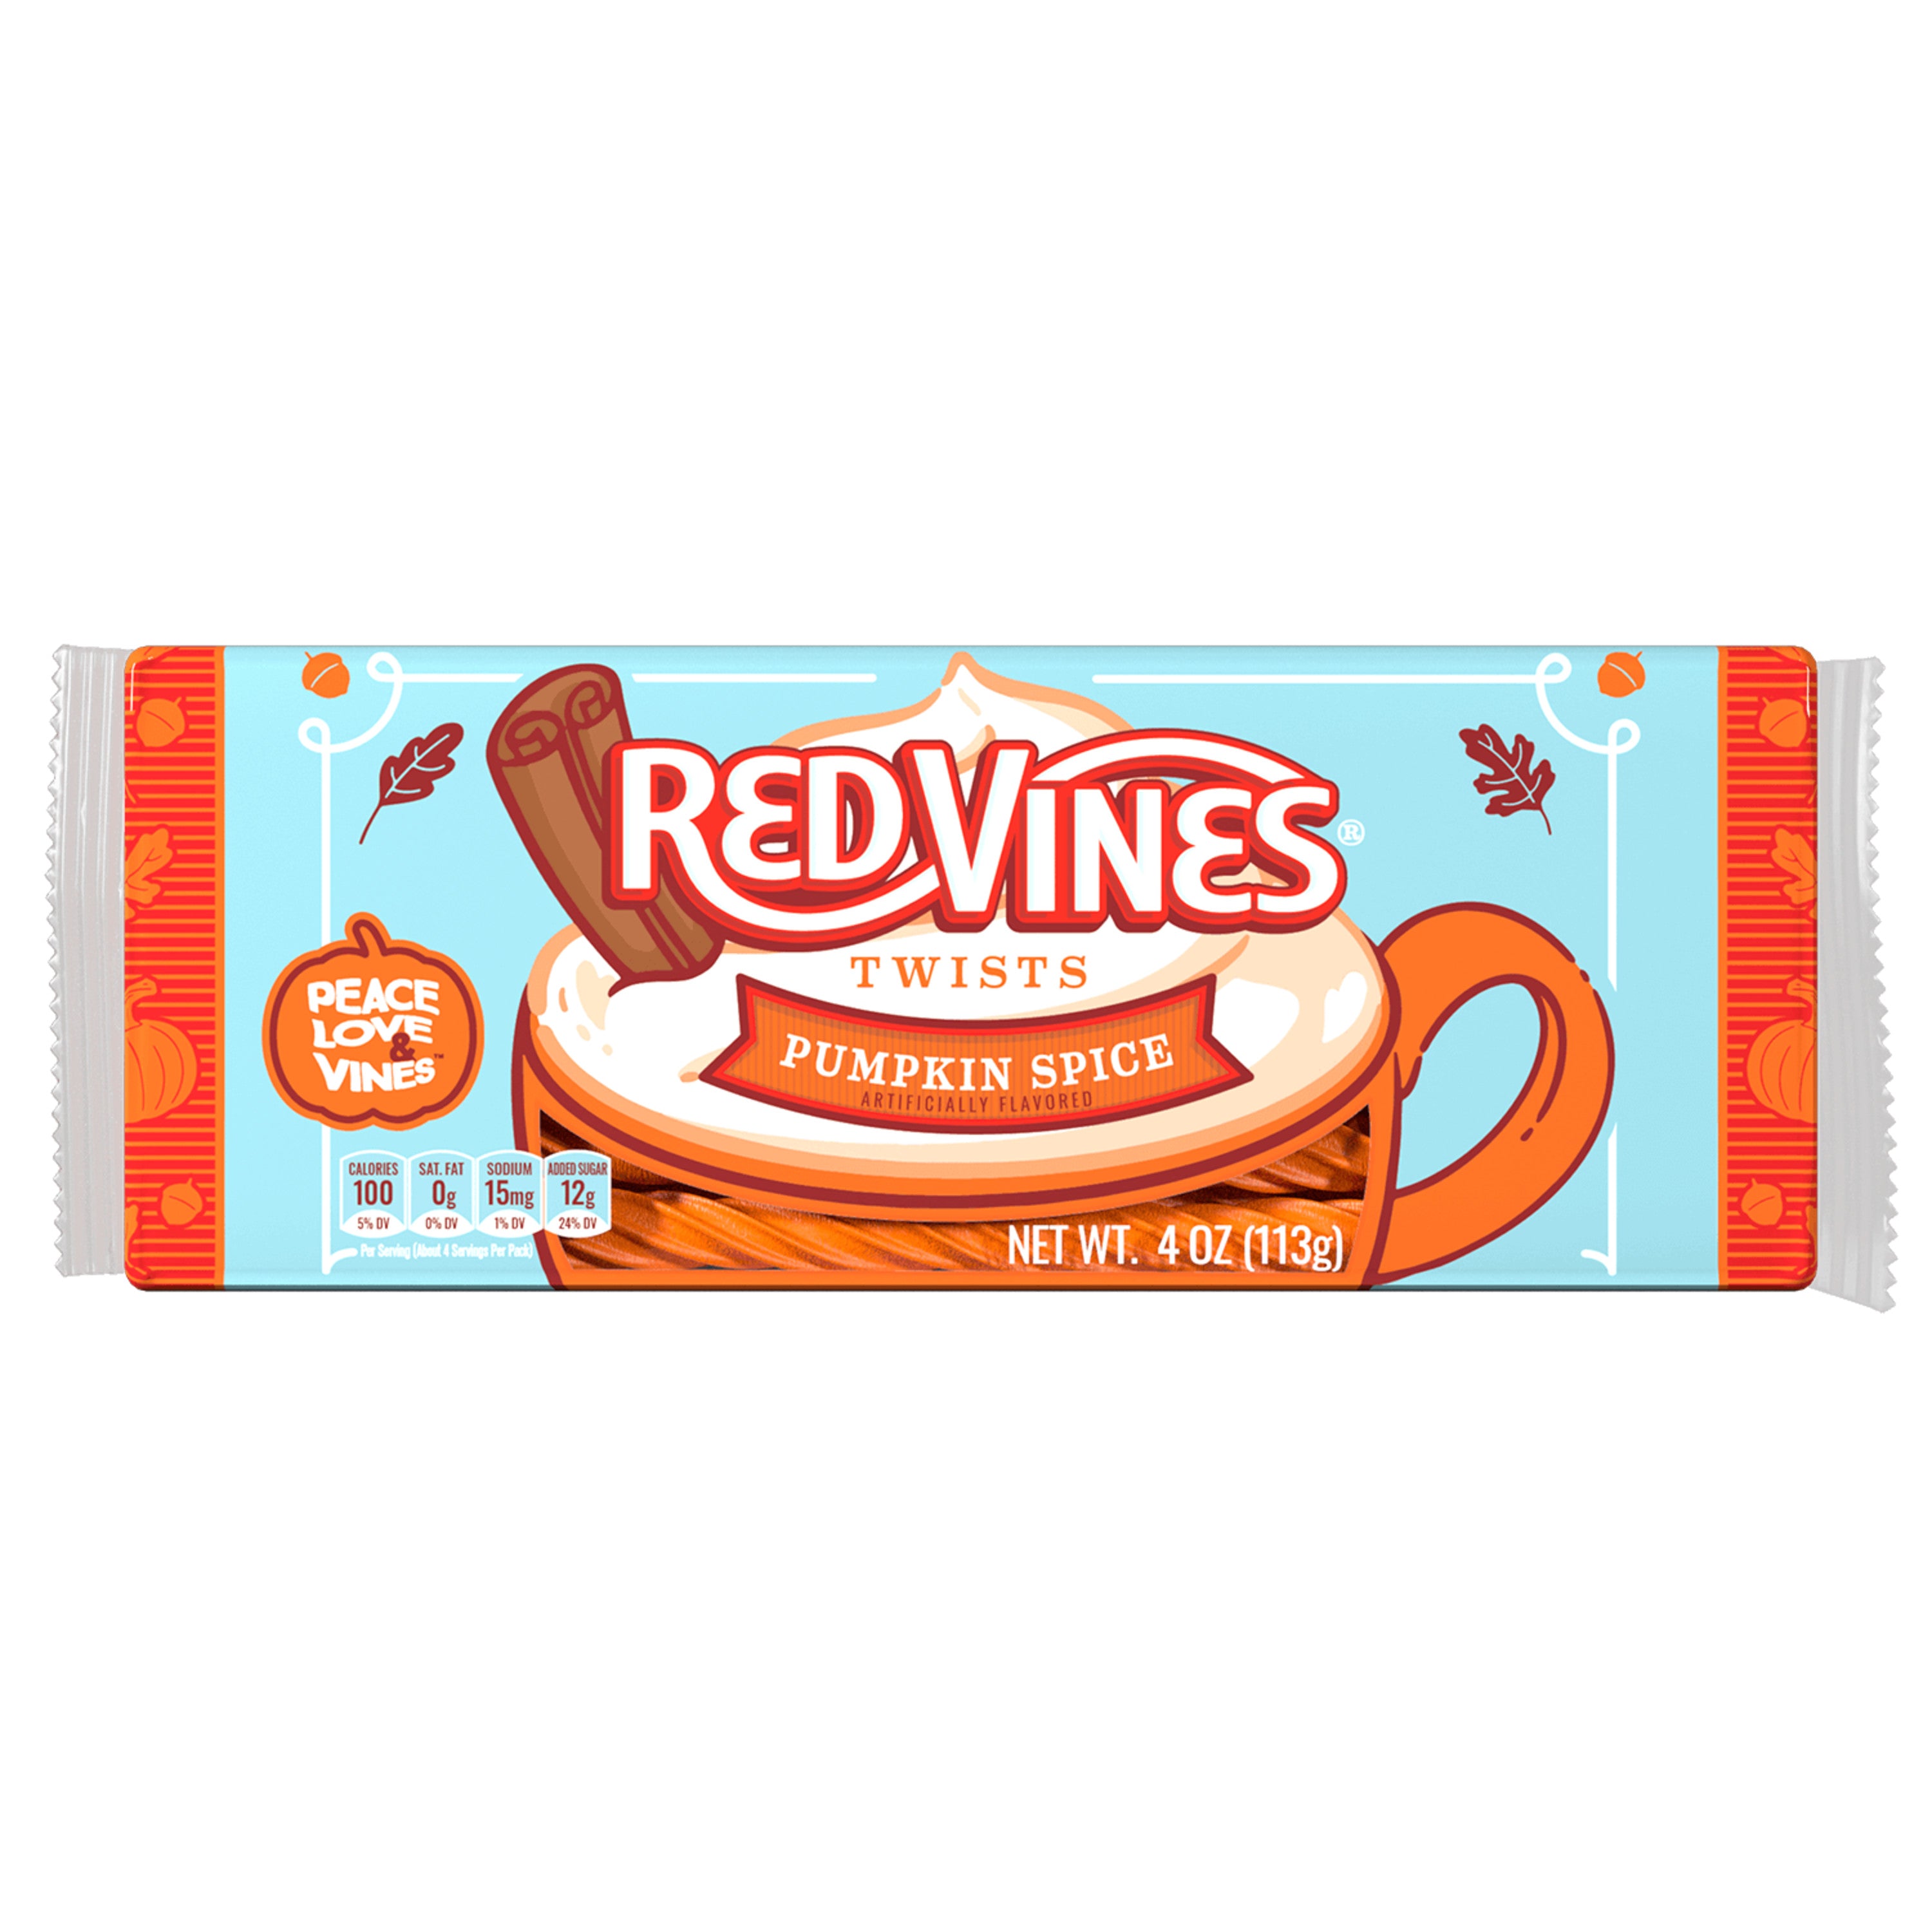 RED VINES Pumpkin Spice Halloween Candy Twists - front of 4oz tray